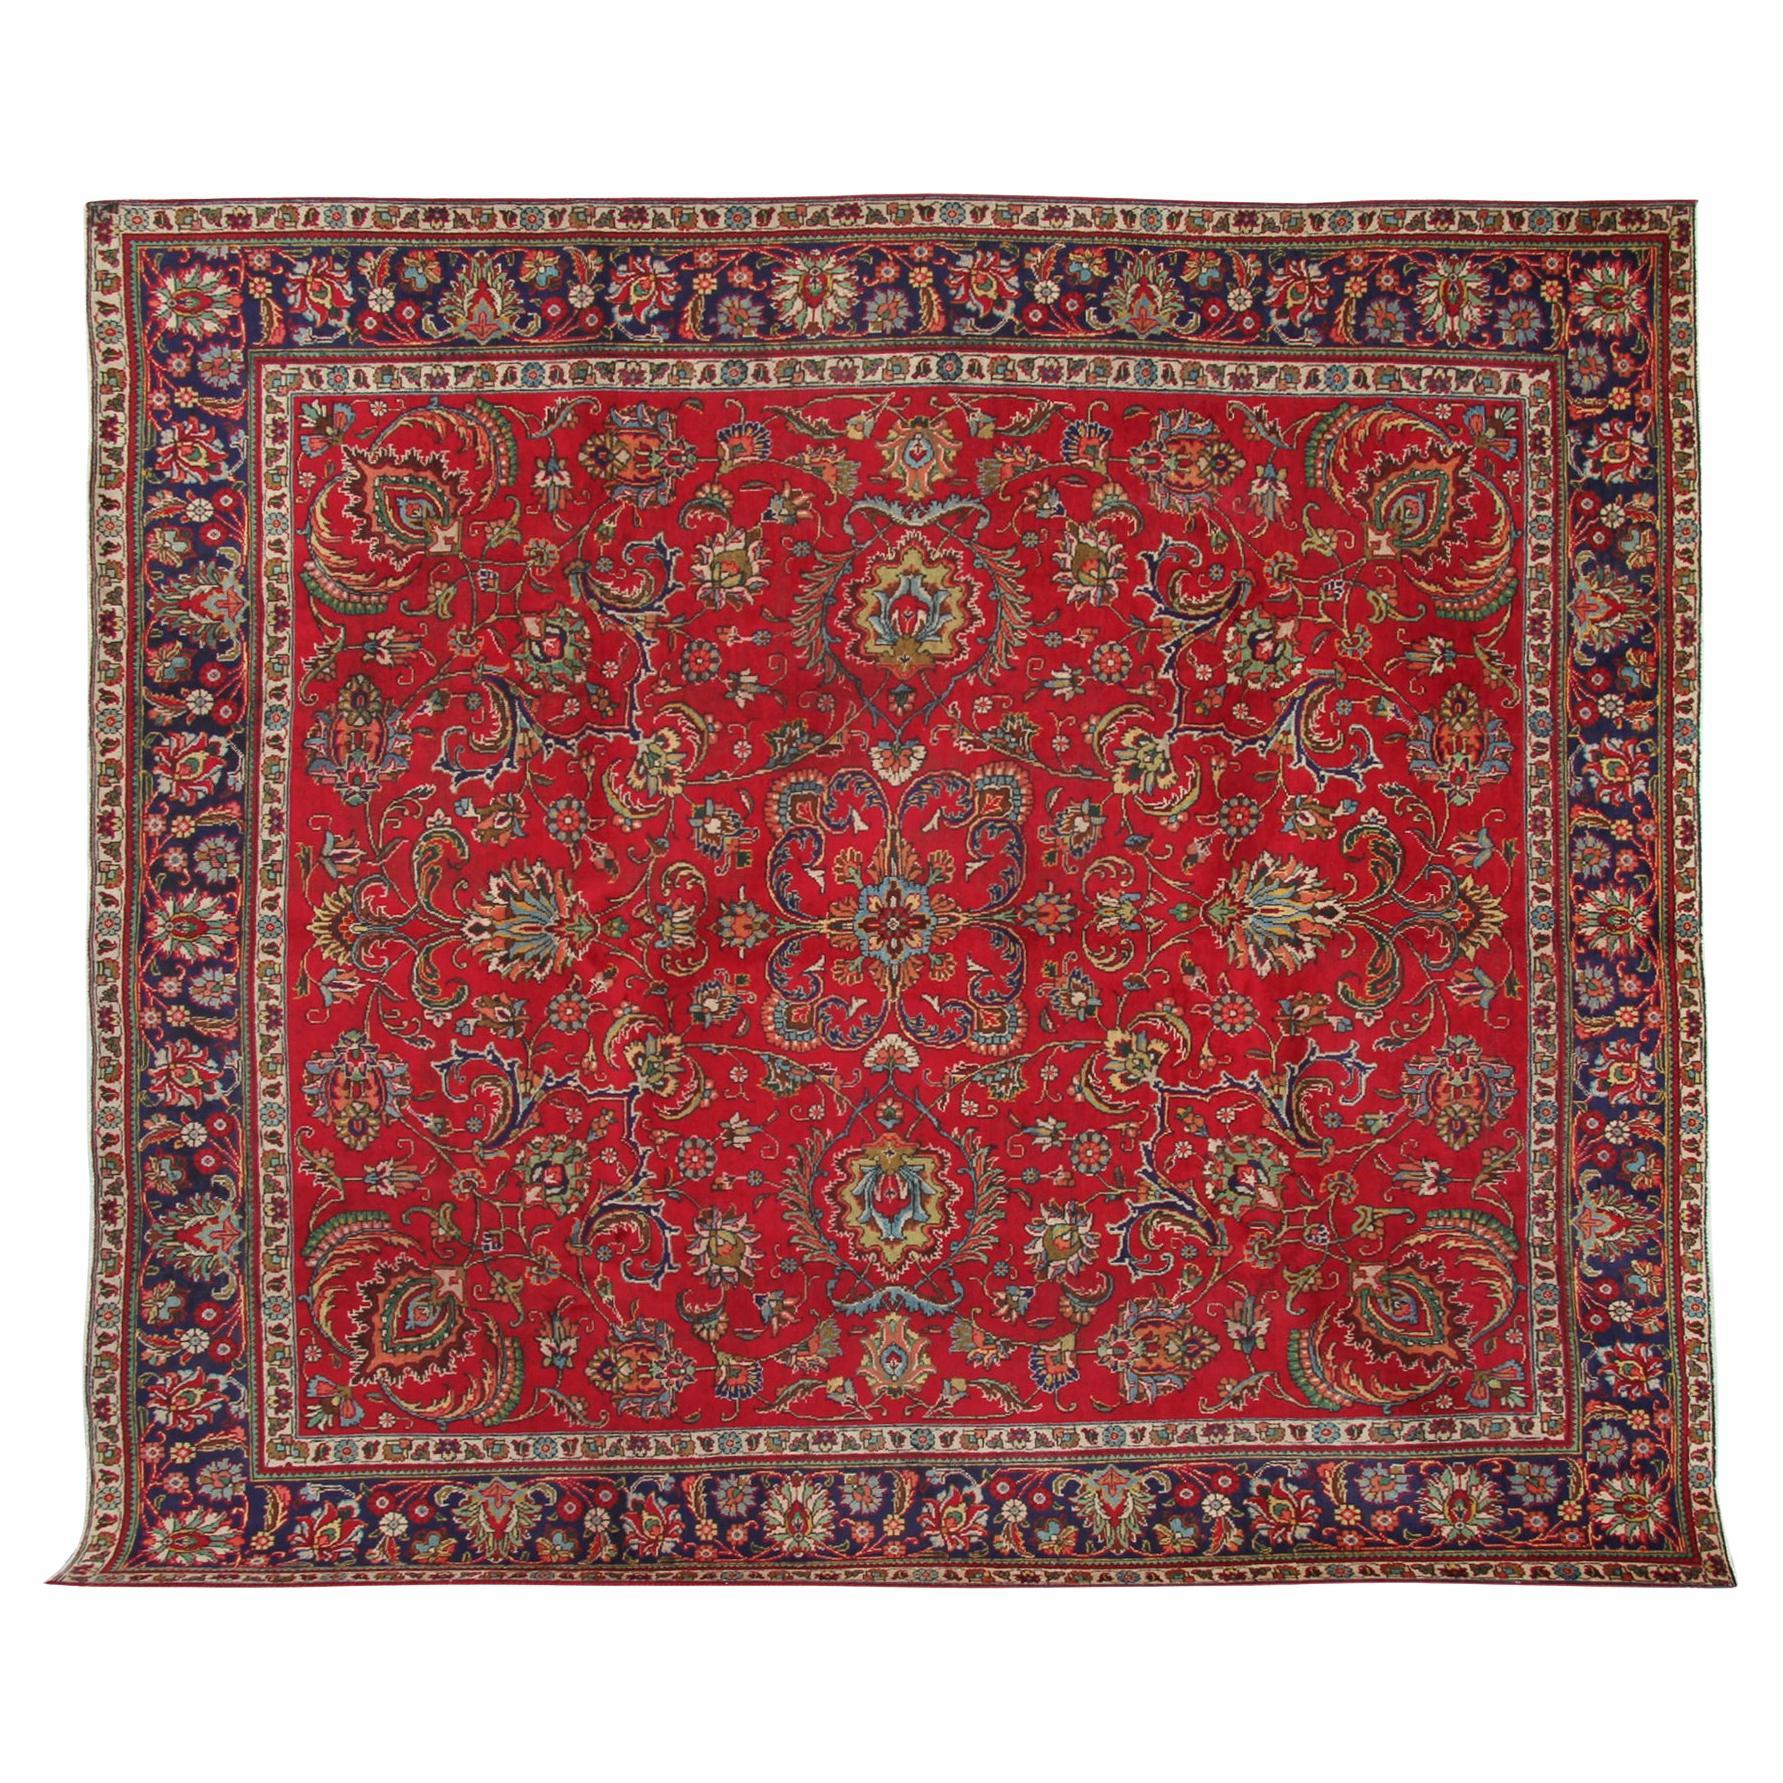 Large Carpet Handmade Red Square Rug Traditional Turkish Area Rug For Sale